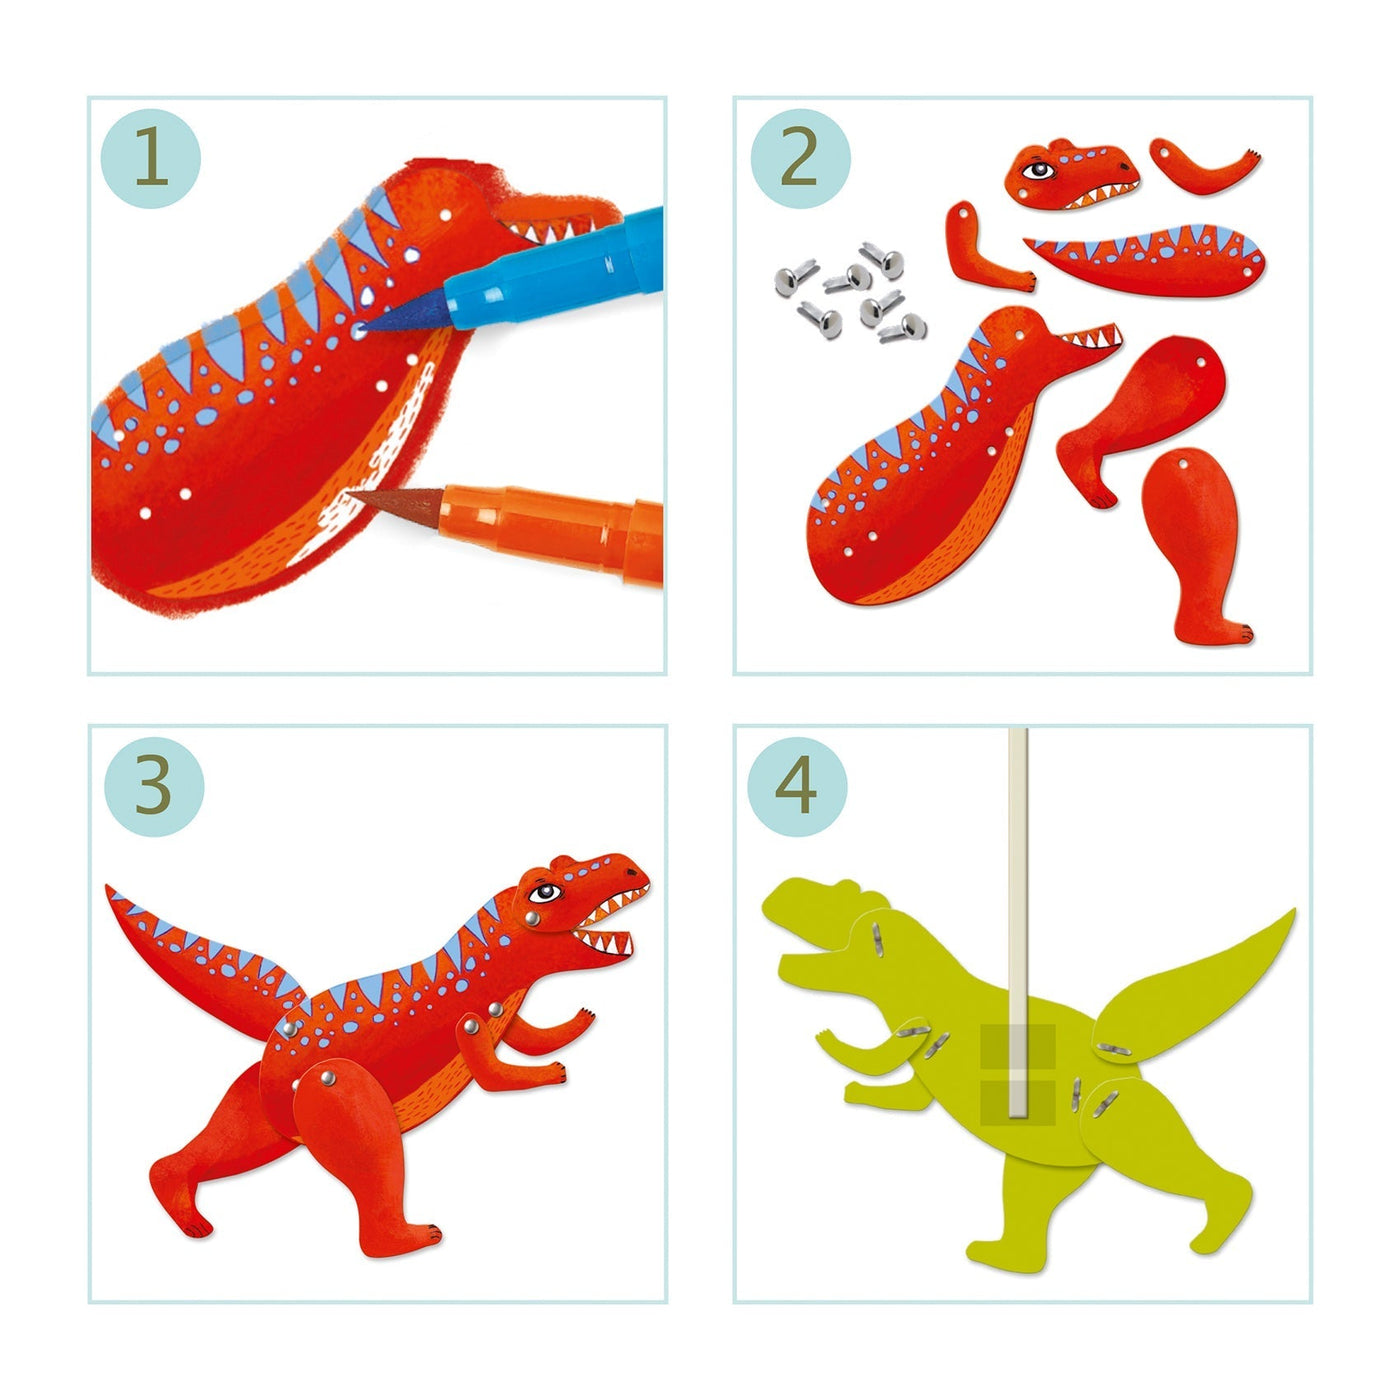 Jumping Jacks -Dinos - Small Gifts For Older Ones - Colouring Surprises